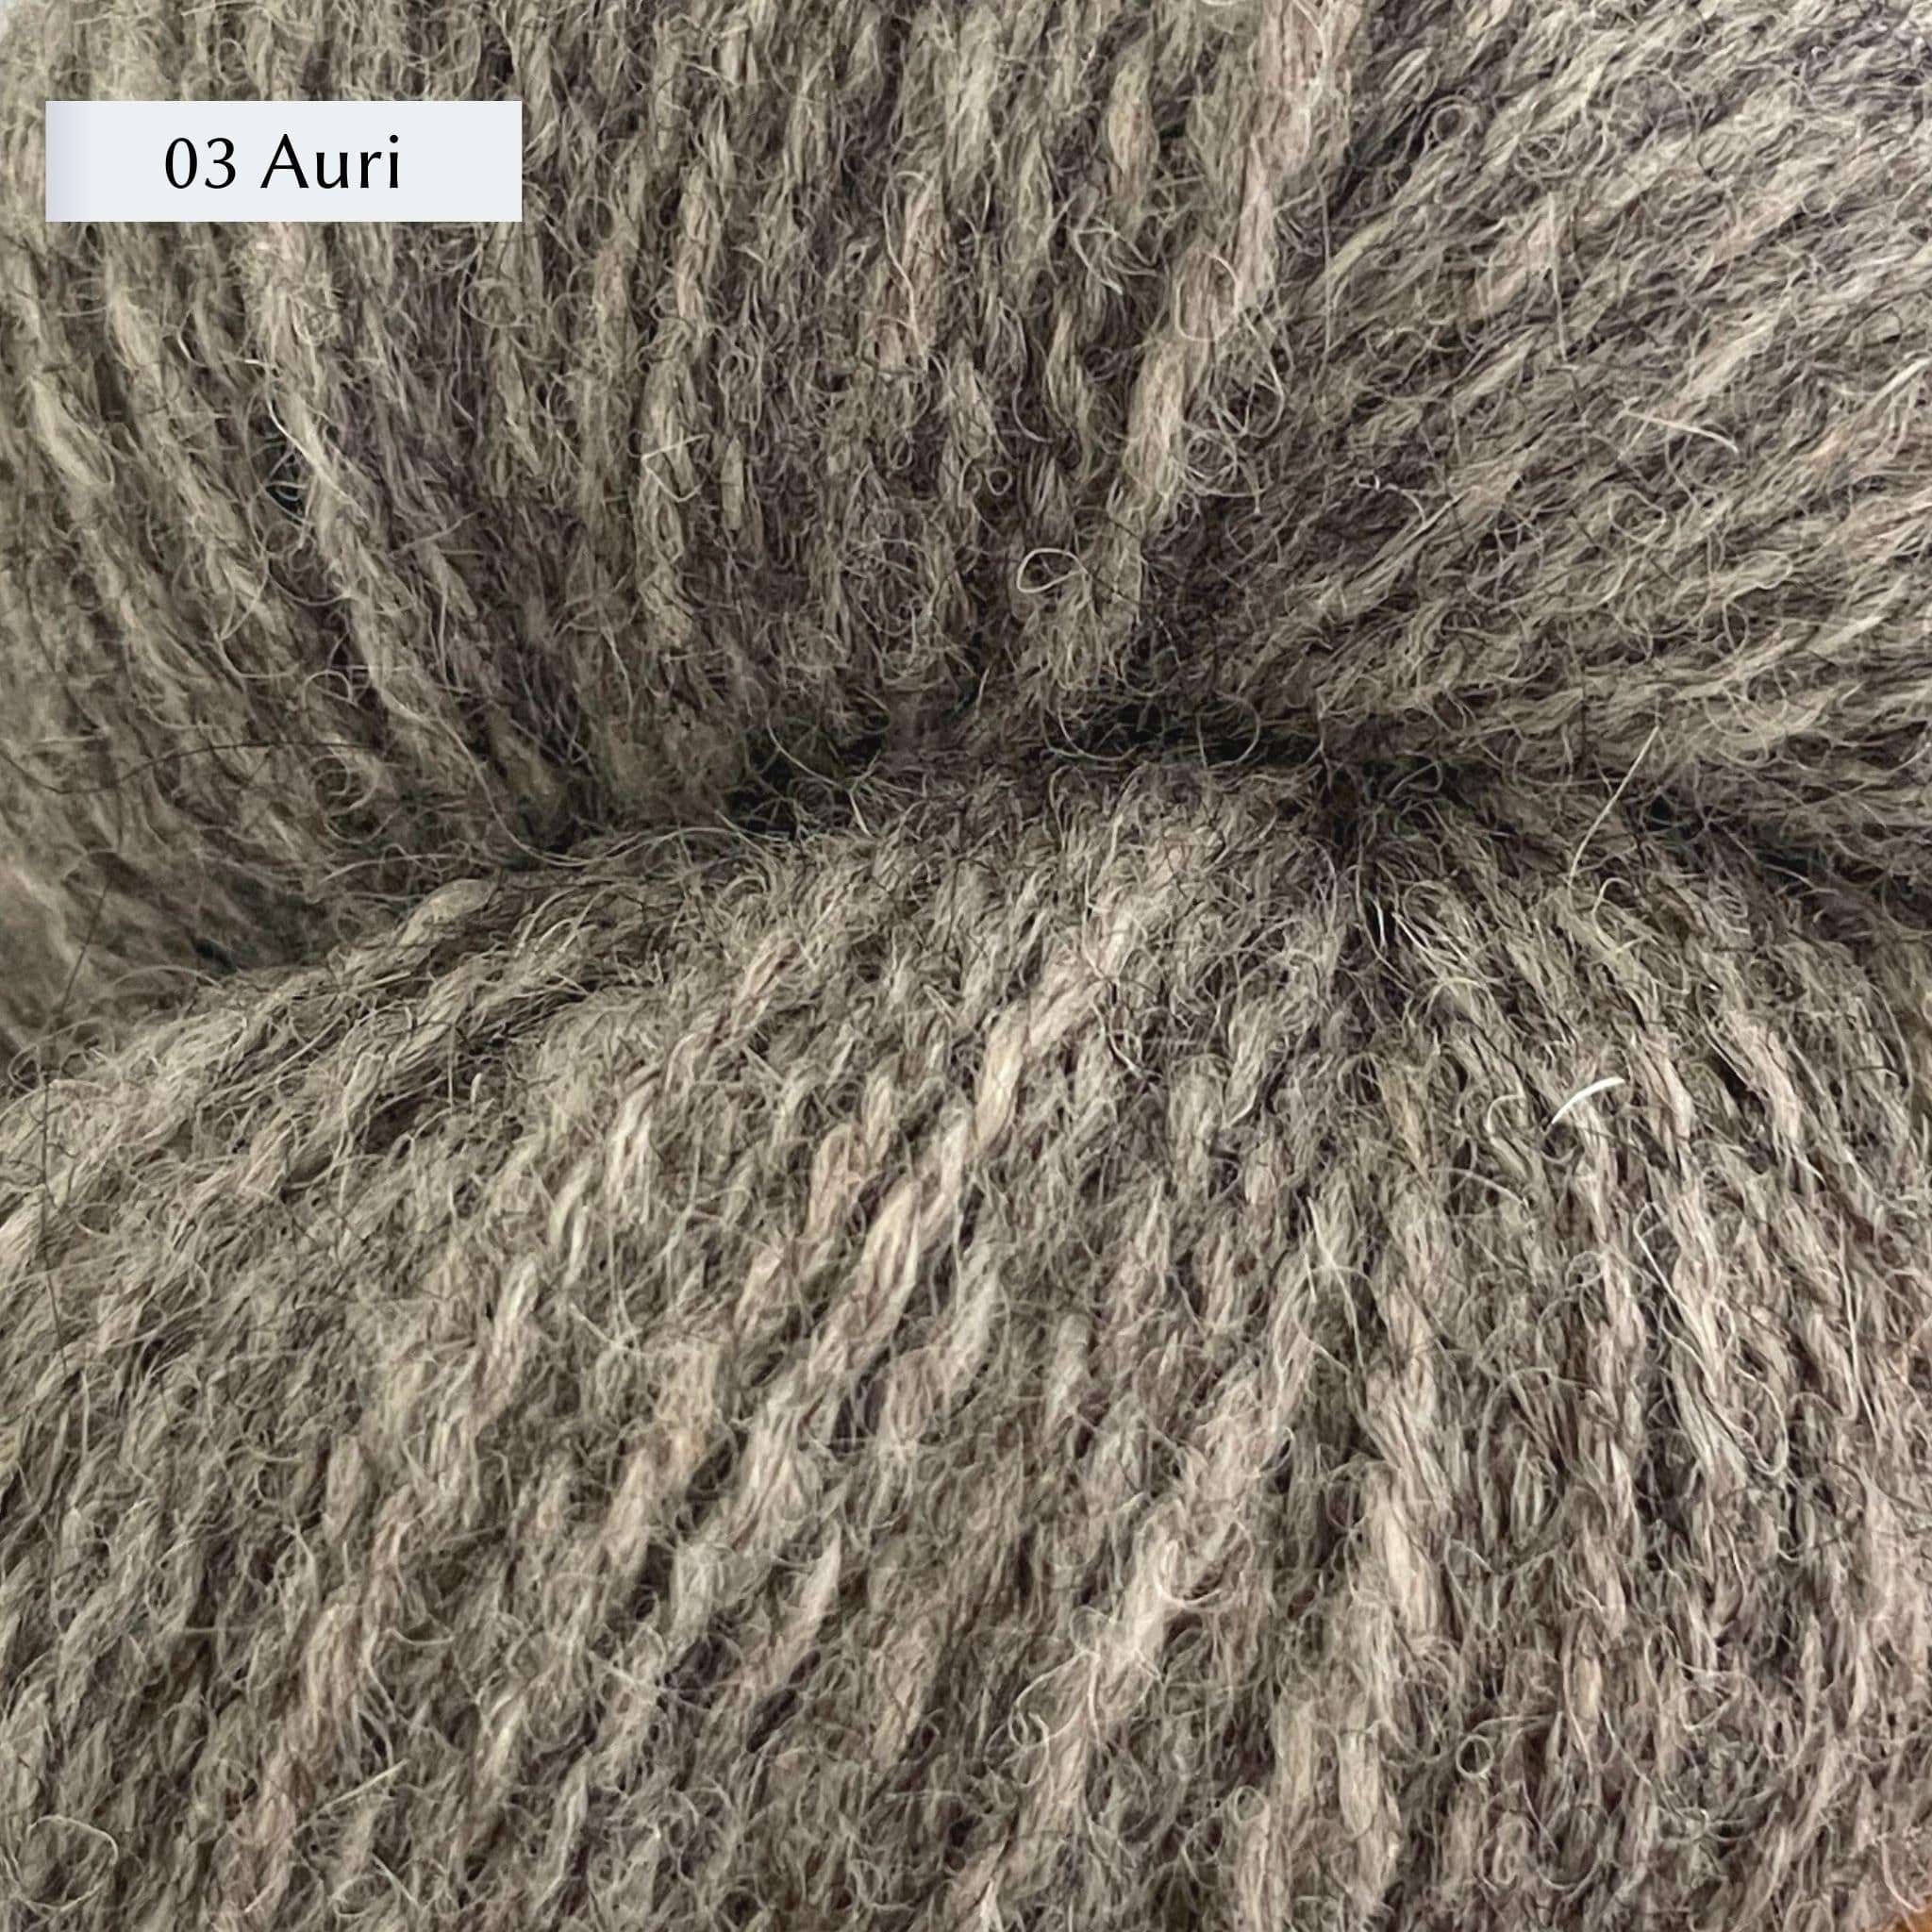 Tukuwool DK Yarn, 100% Finnish Wool shown in colorway 03 Auri which is a grey color. 